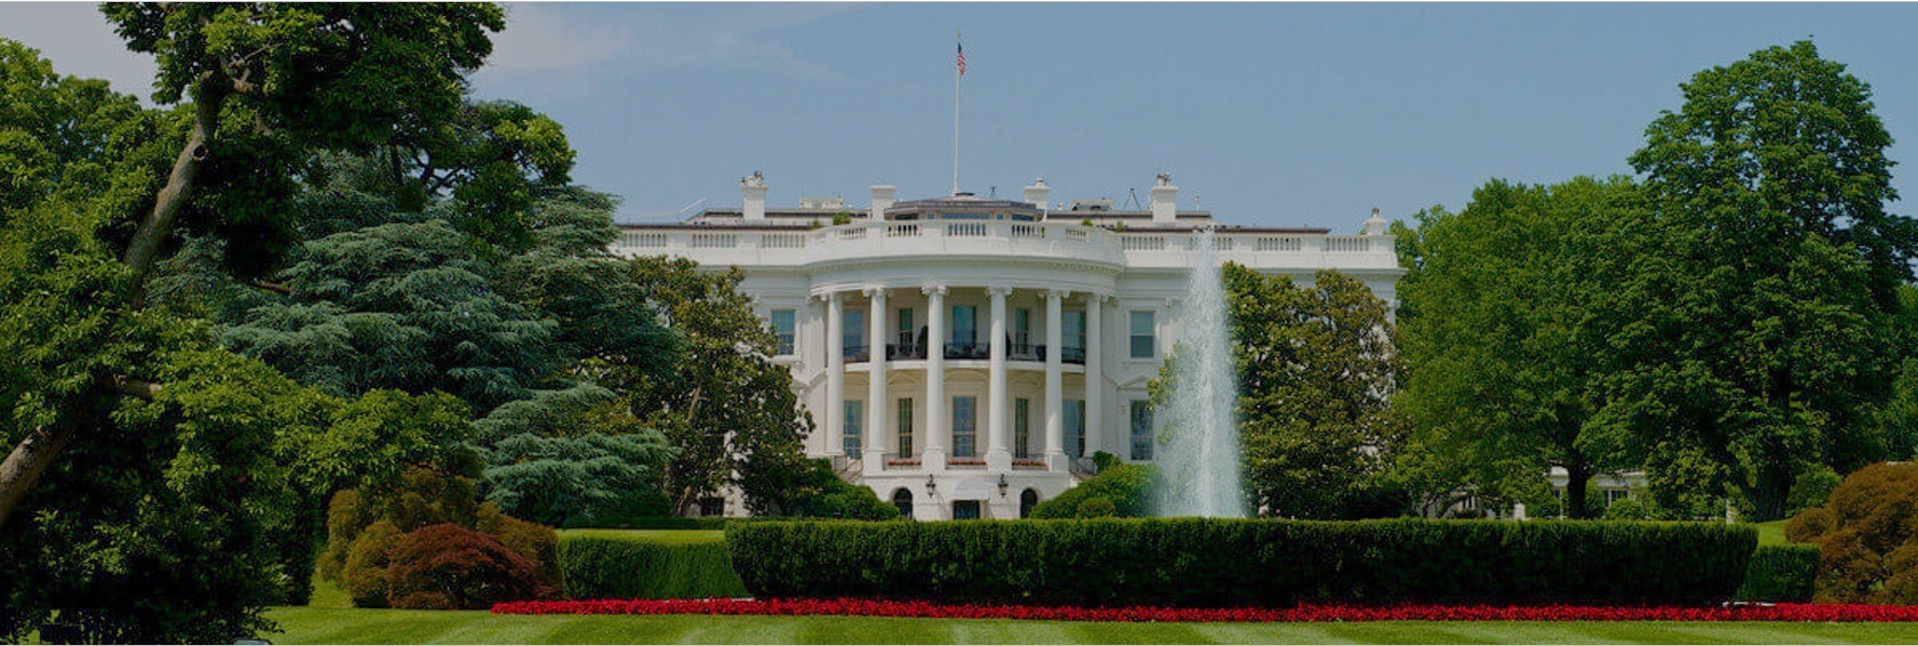 White House (Oval Office Side)